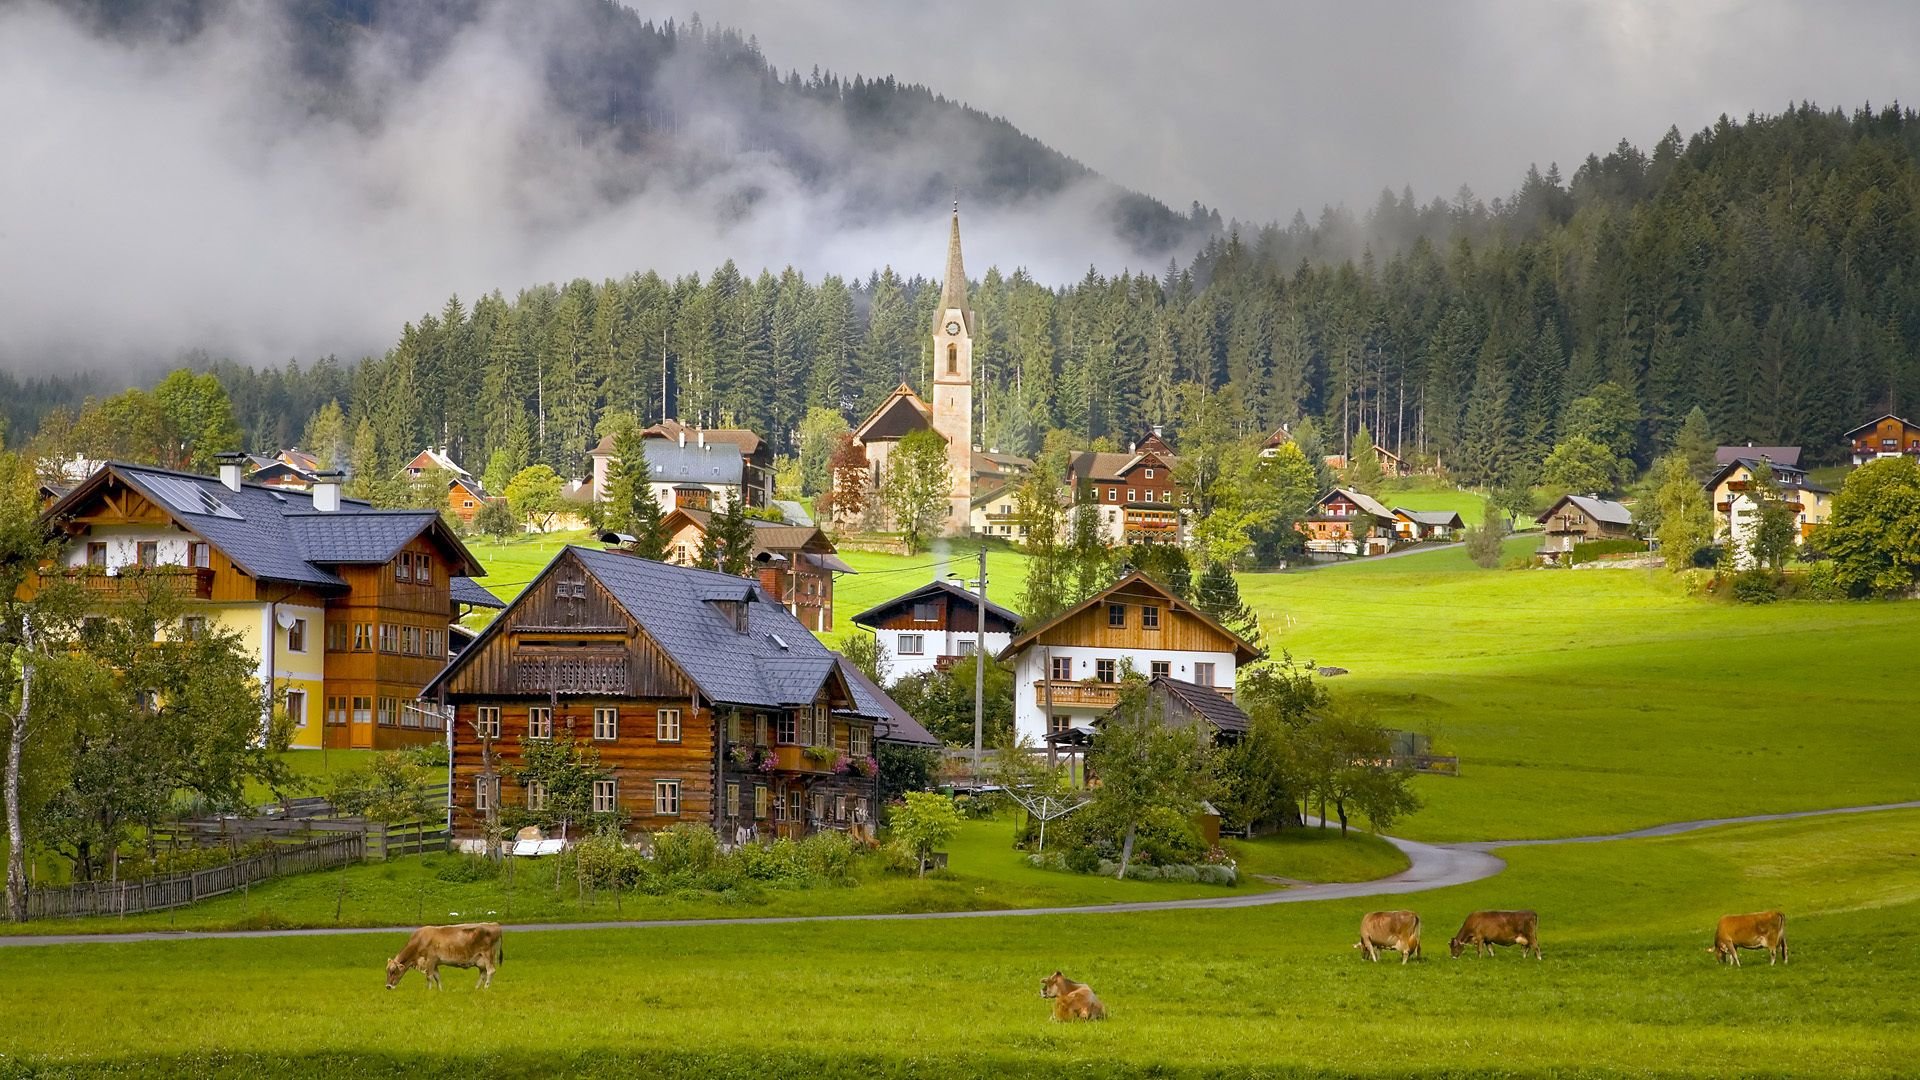 16 Of The Most Beautiful Villages Across The World To Add To Your 